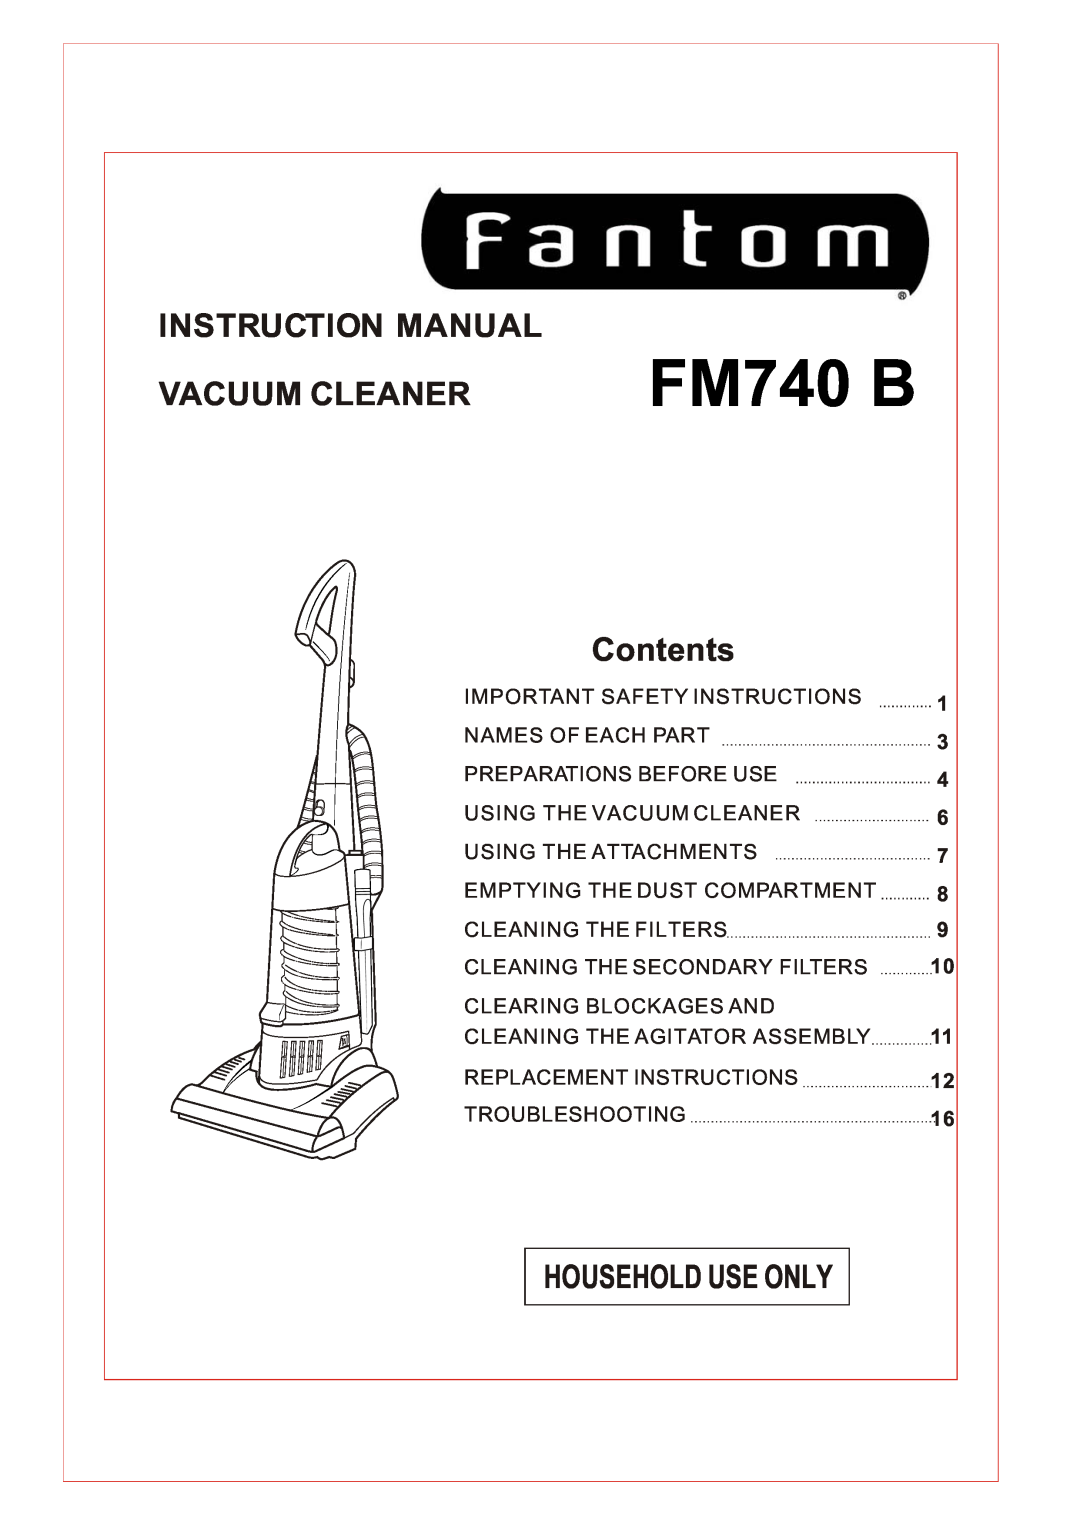 Fantom Vacuum FM740 B instruction manual Vacuum Cleaner, Contents, Household Use Only, 1 3 4 6 7 8 9 